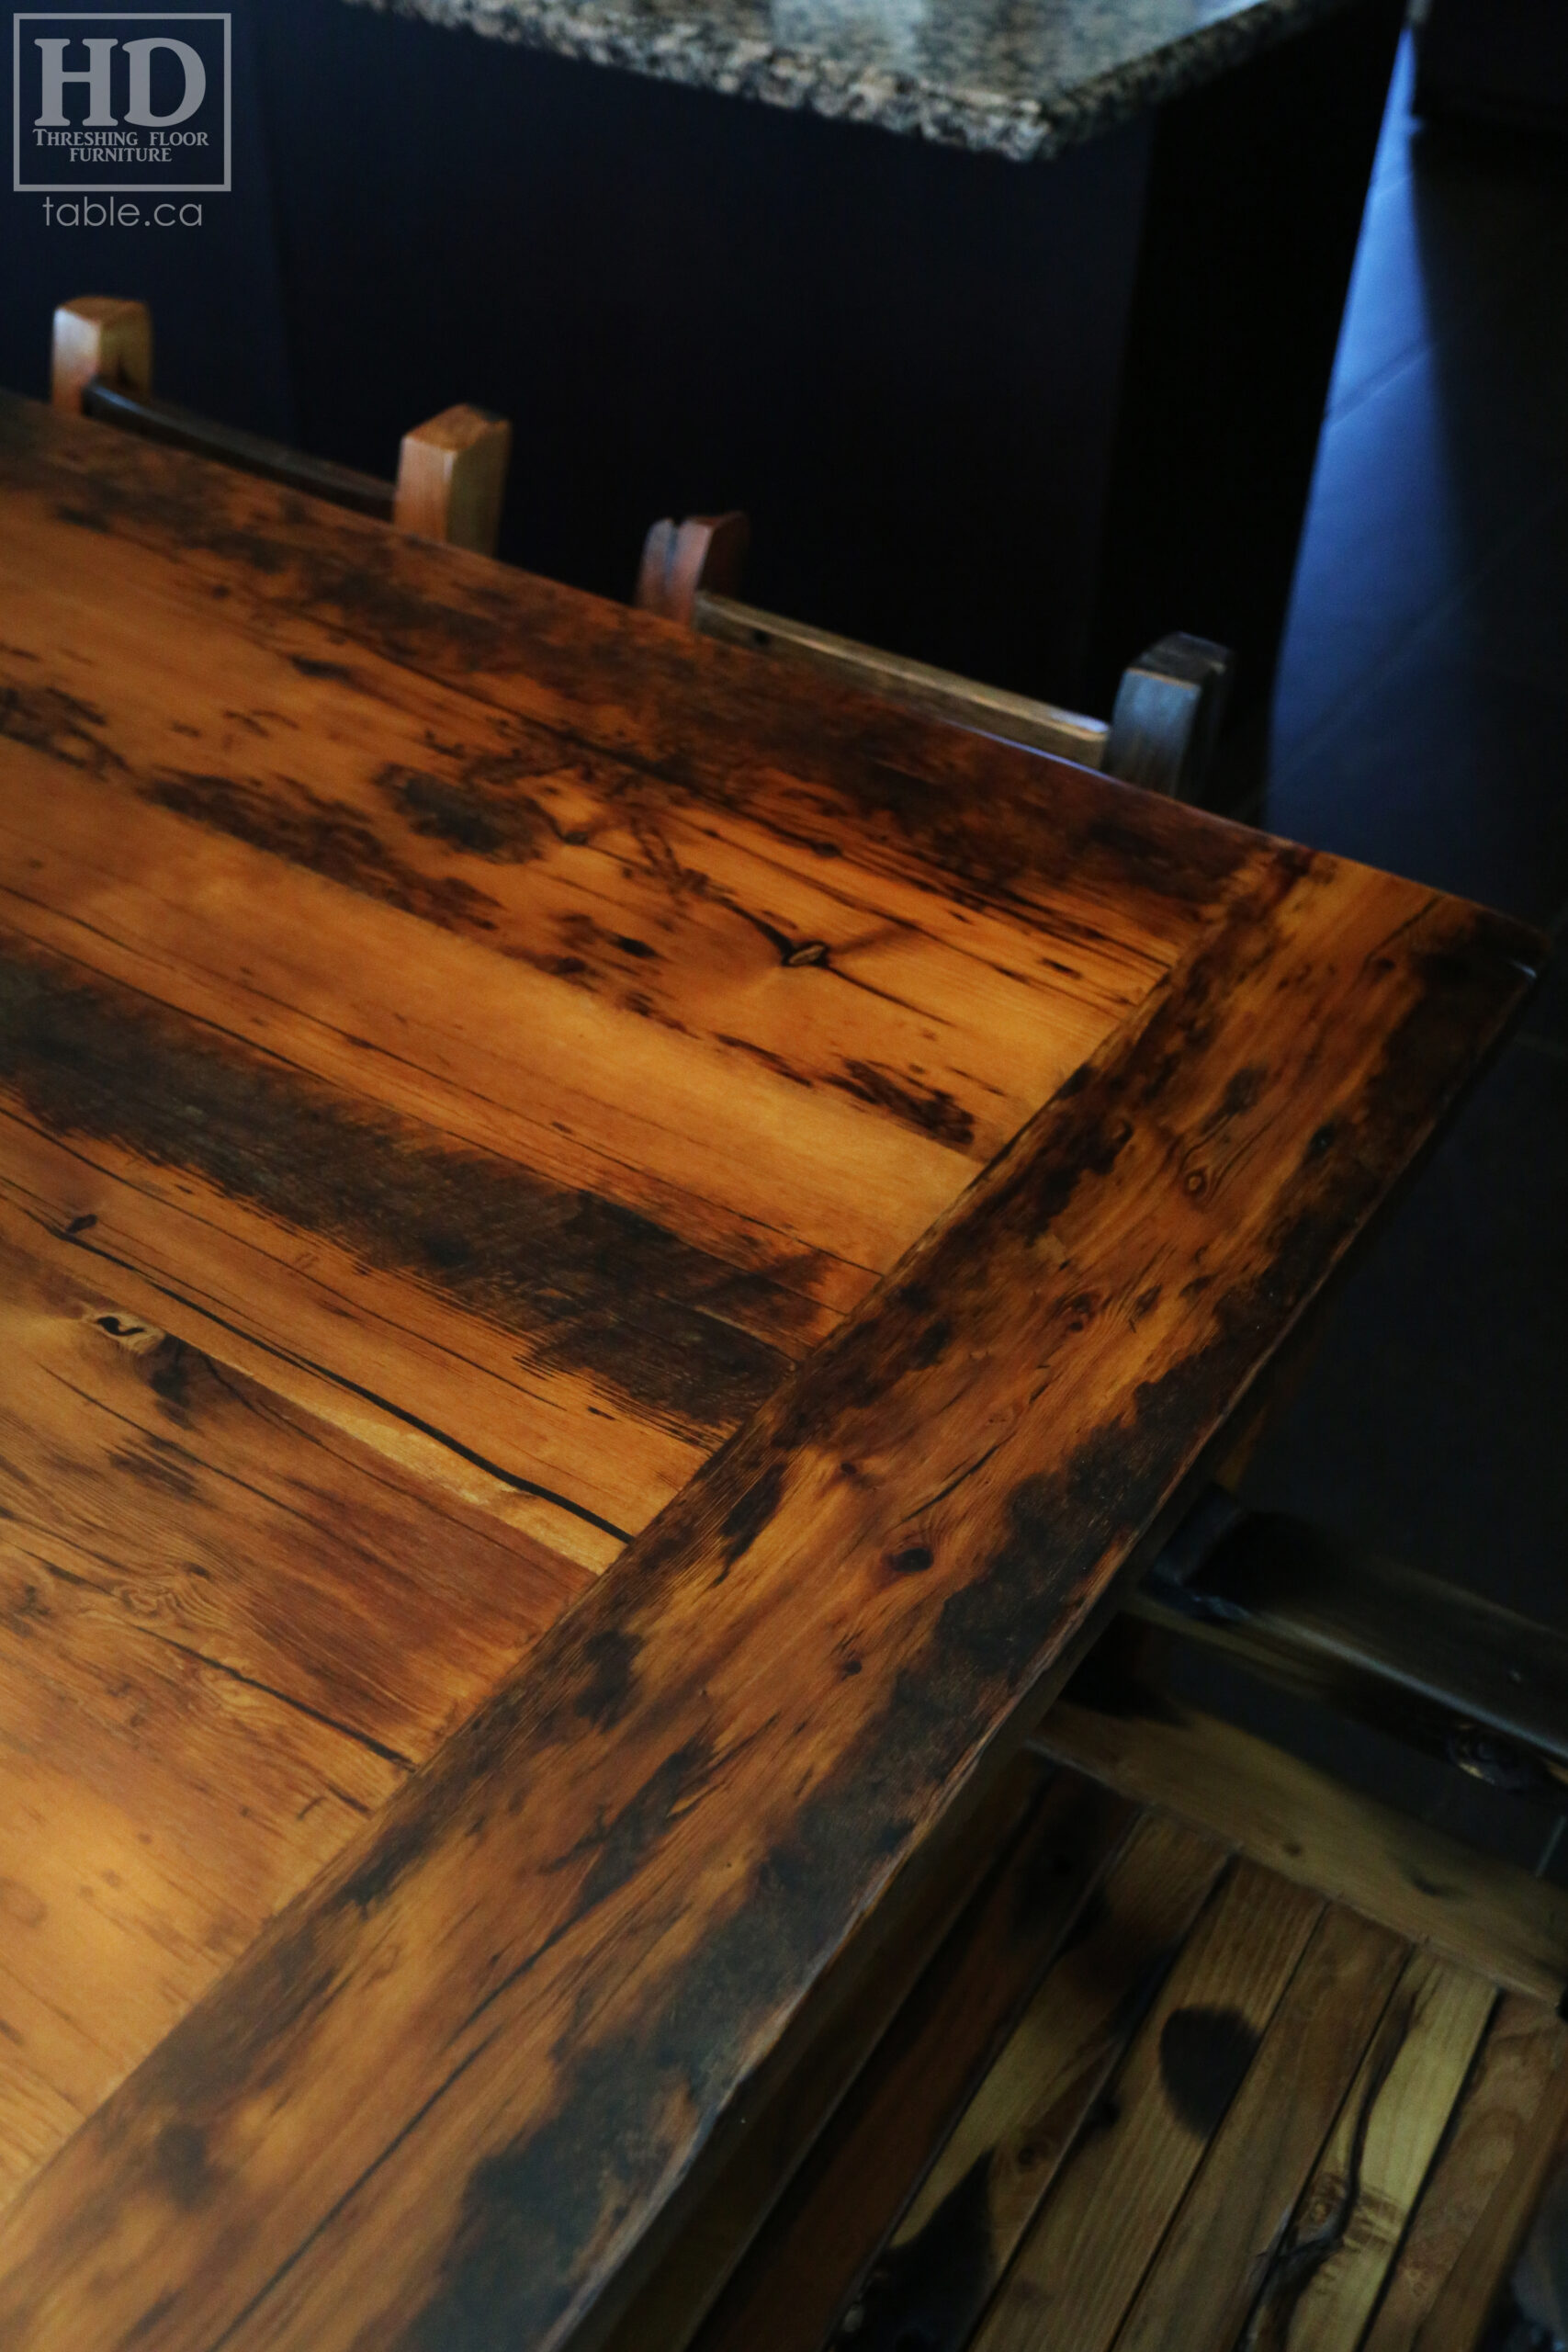 Toronto Harvest Table made from Reclaimed Ontario Barnwood by HD Threshing Floor Furniture / www.table.ca